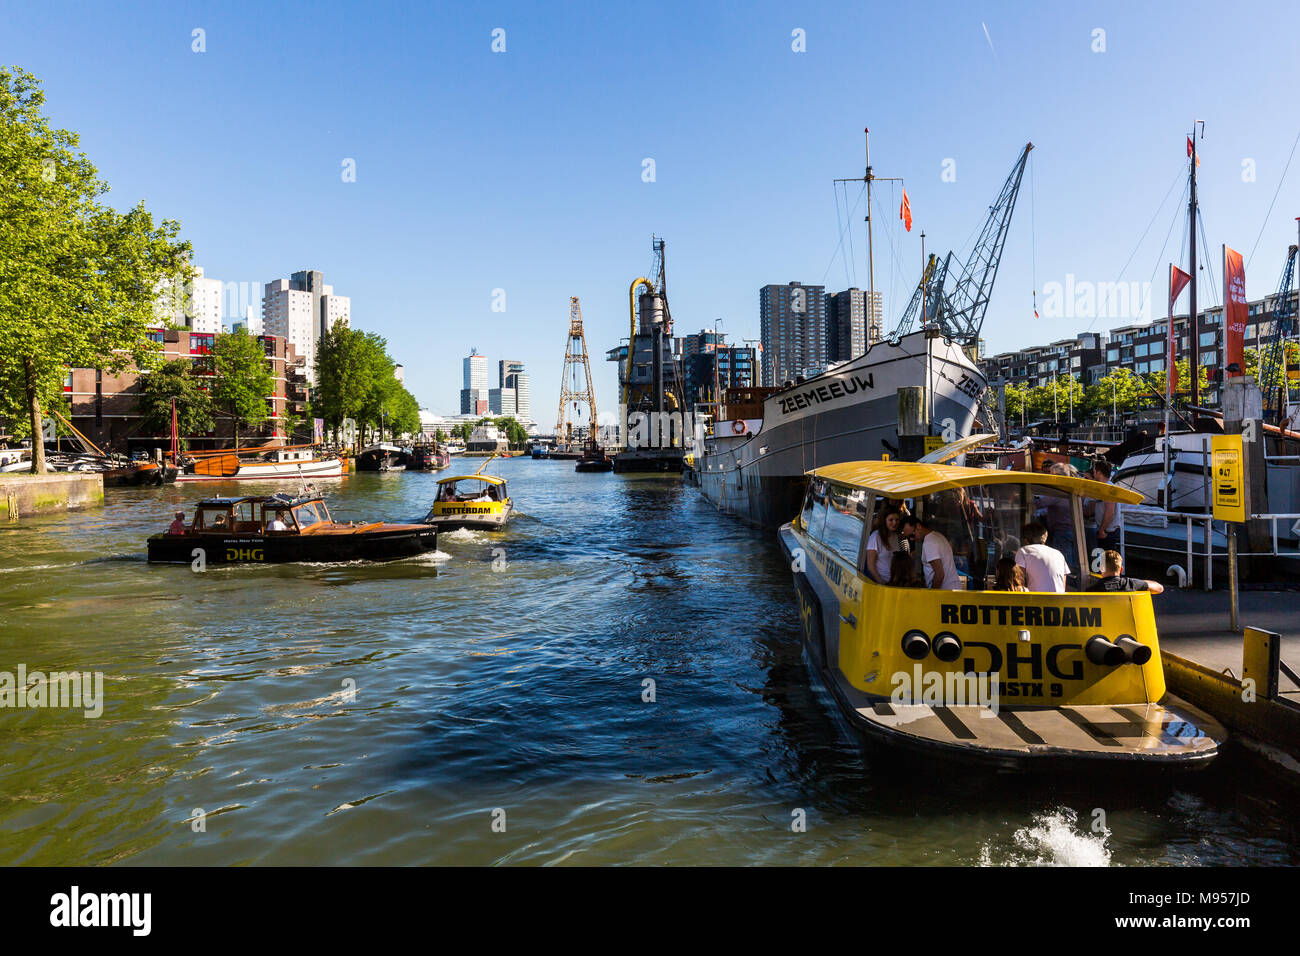 ROTTERDAM, NETHERLANDS - MAY 25, 2017: Exterior view of the Leuvehaven ship harbor in the city center of Rotterdam on May 25, 2017. Its located betwee Stock Photo